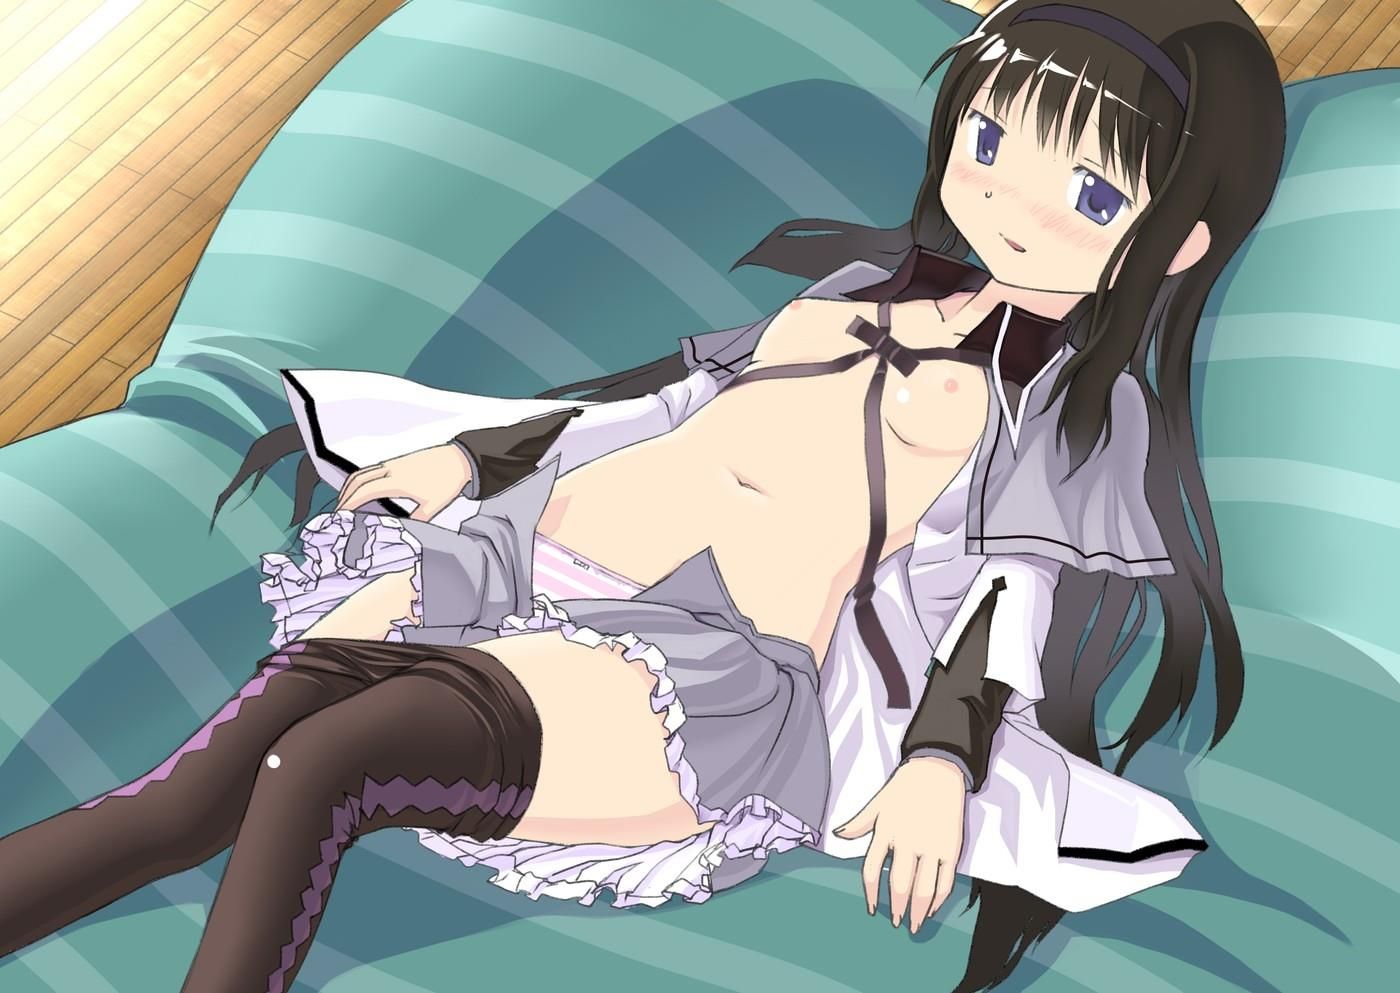 "Puella Magi Madoka Magica" and surely baocun becomes covered in cum wwwww 18